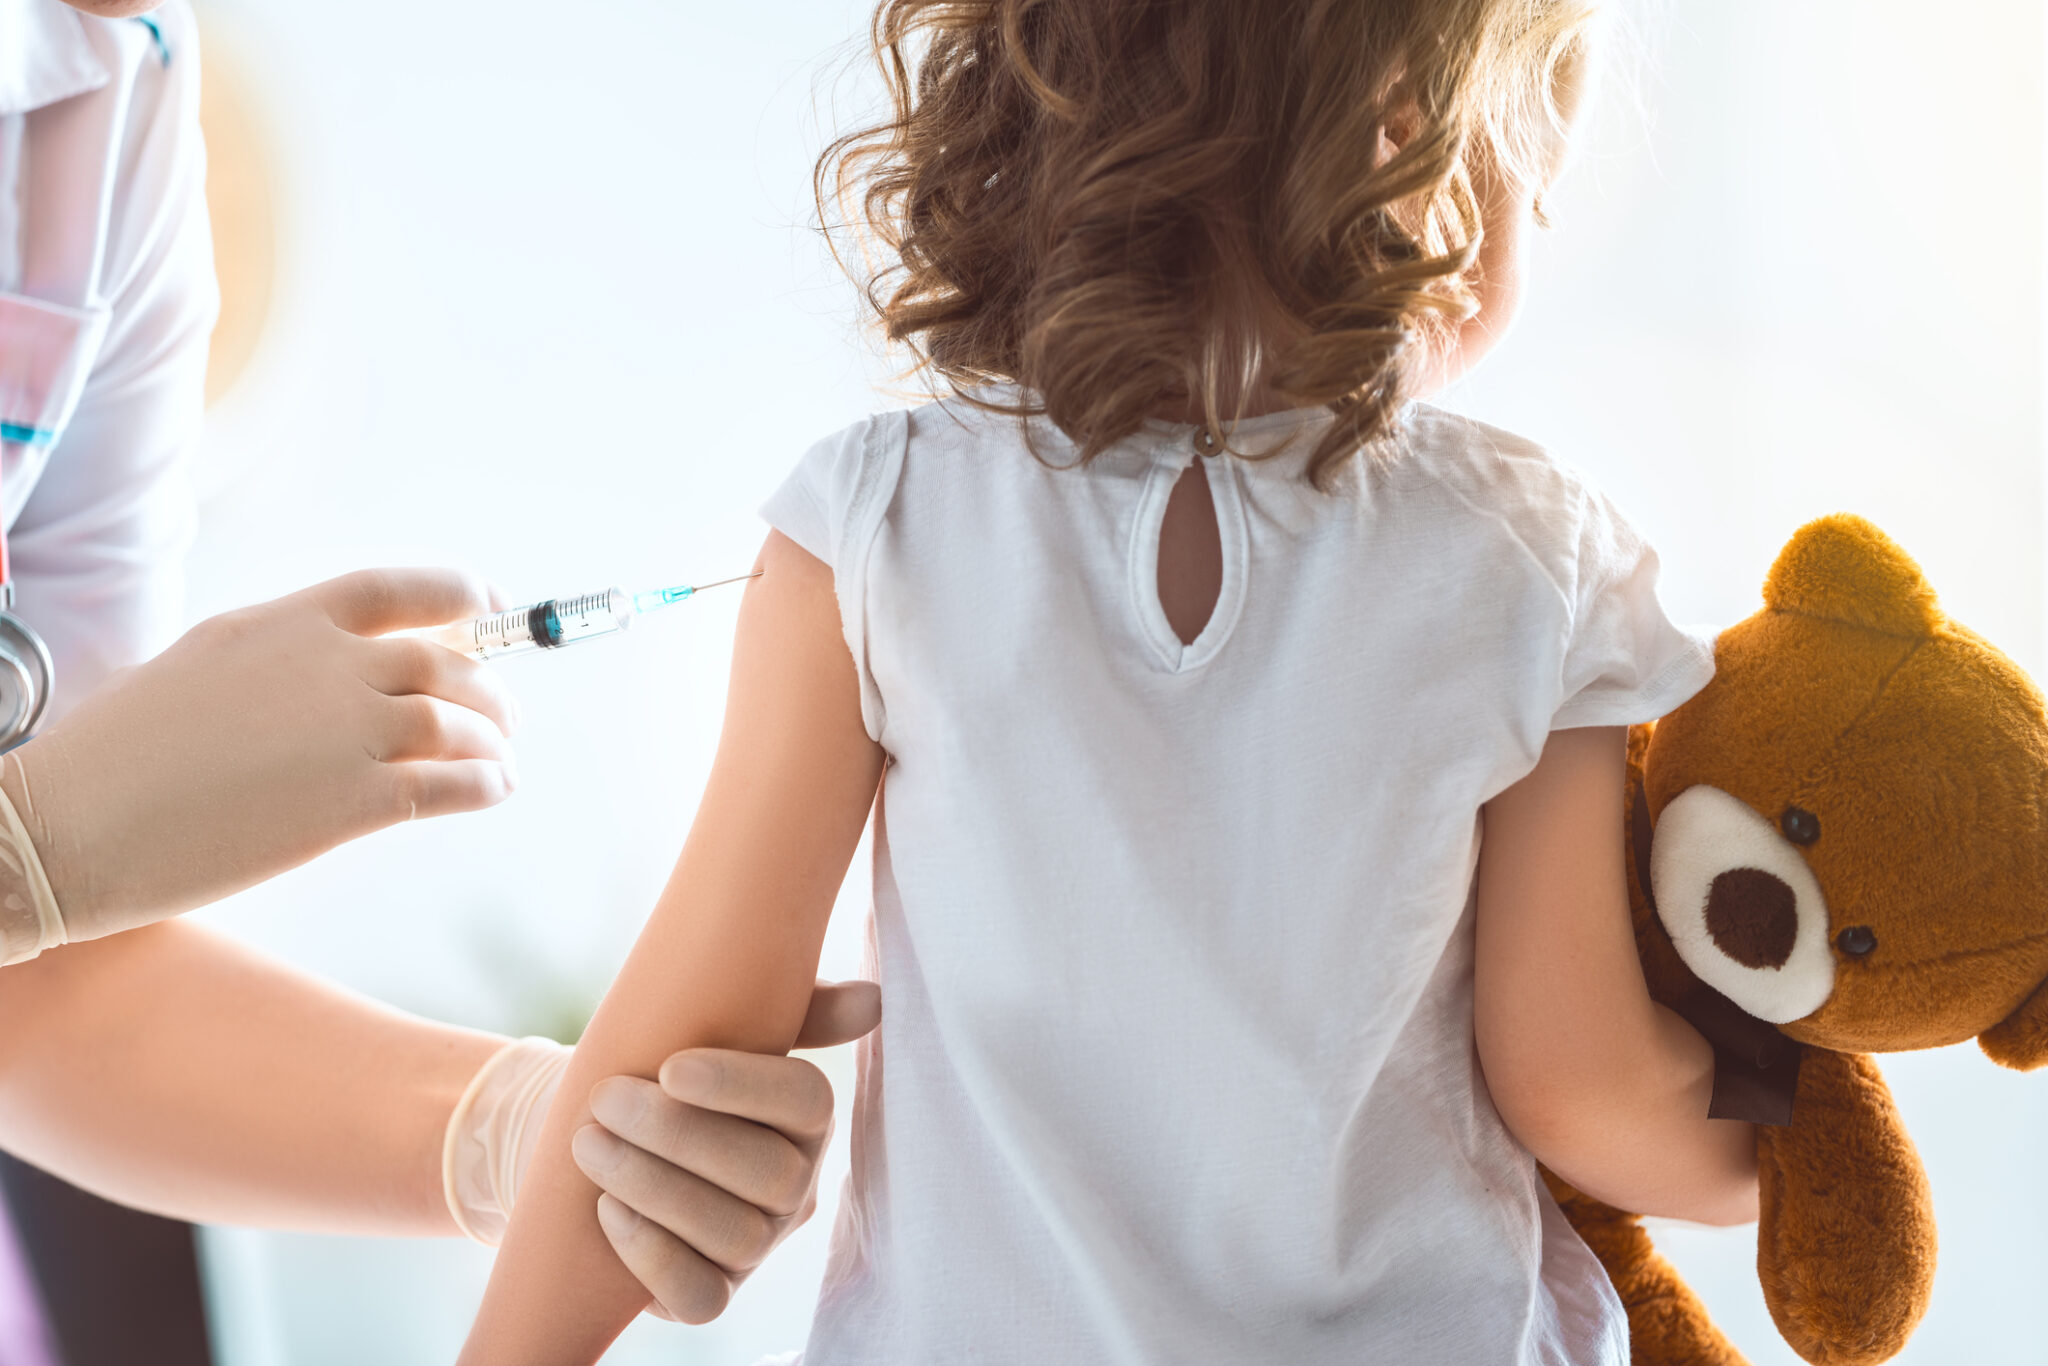 Toddler getting a COVID-19 vaccine